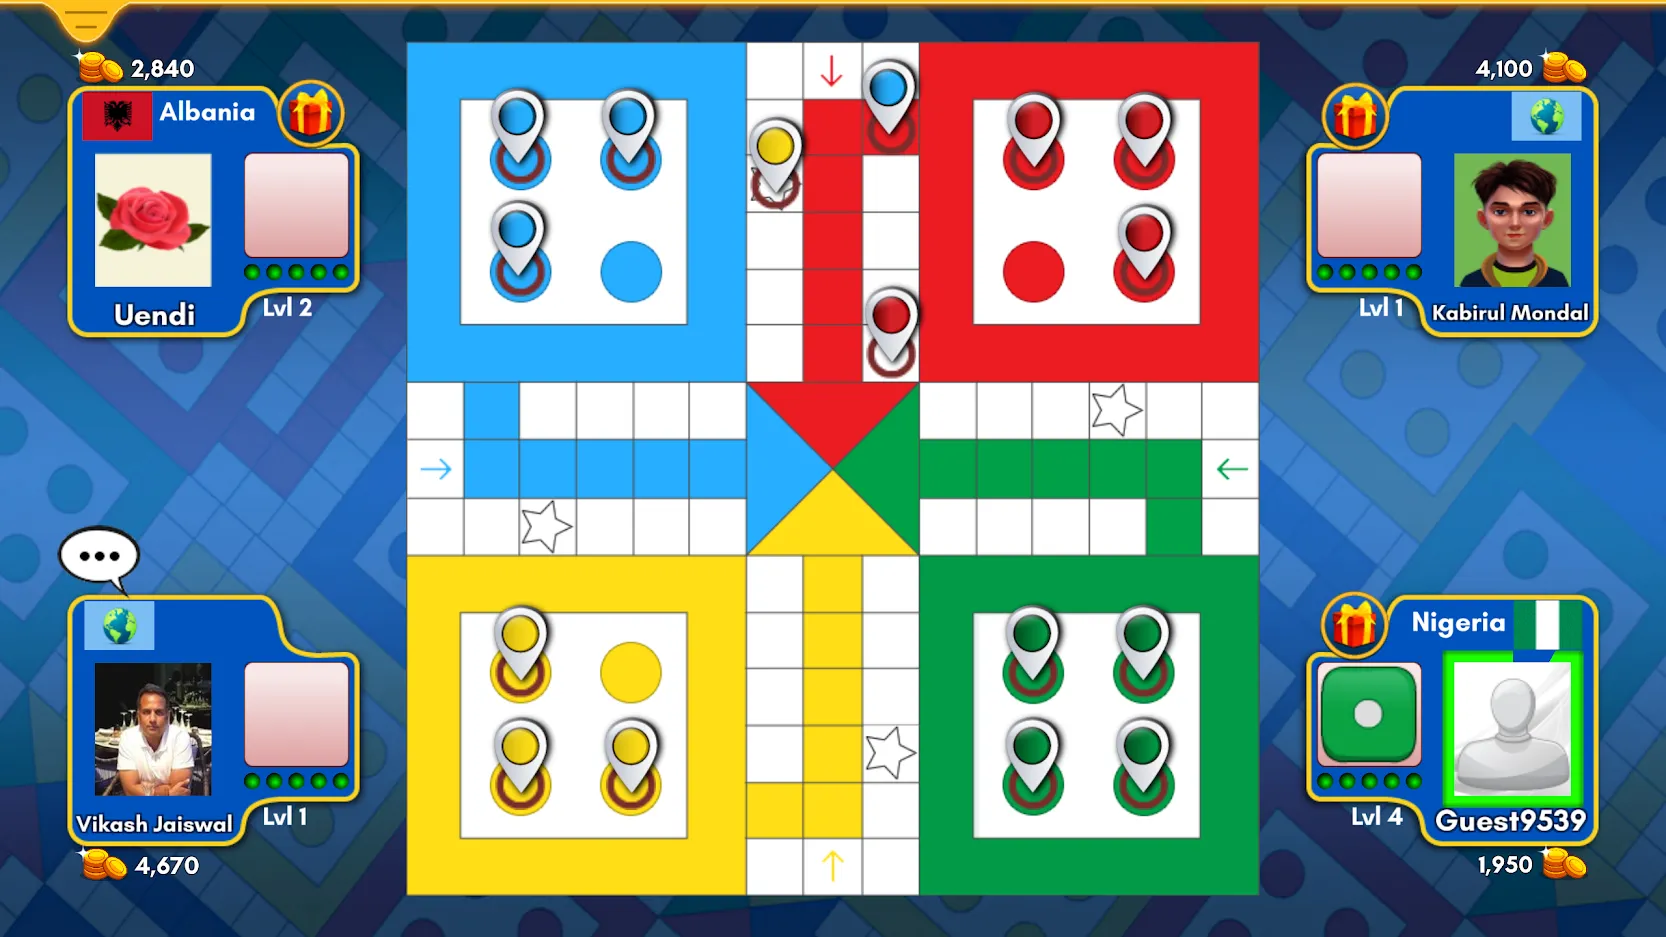 Ludo Club - Fun Dice Game Tips, Cheats, Vidoes and Strategies